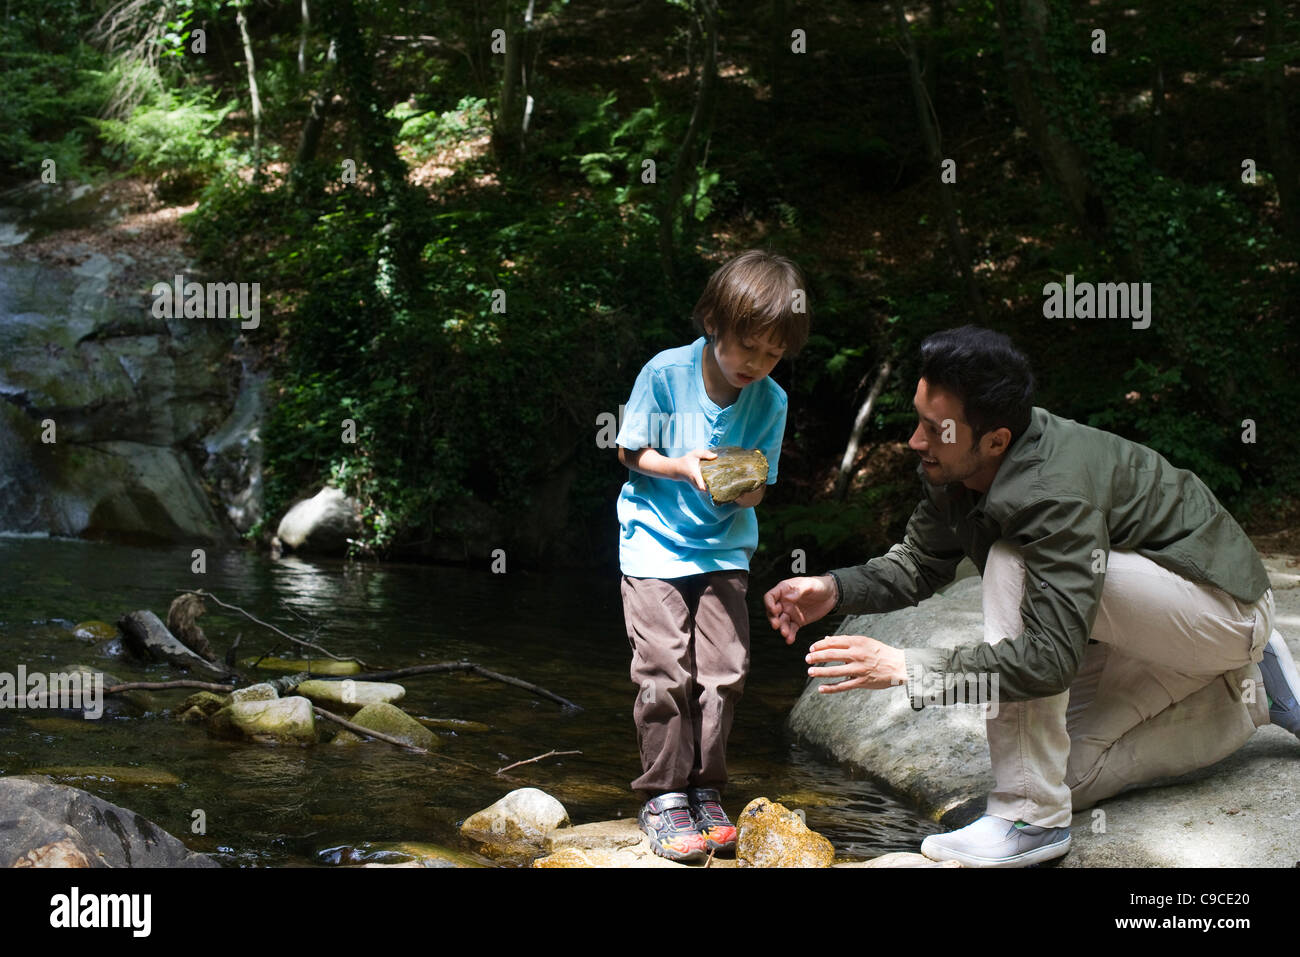 Father and son exploring nature, boy holding rock Stock Photo